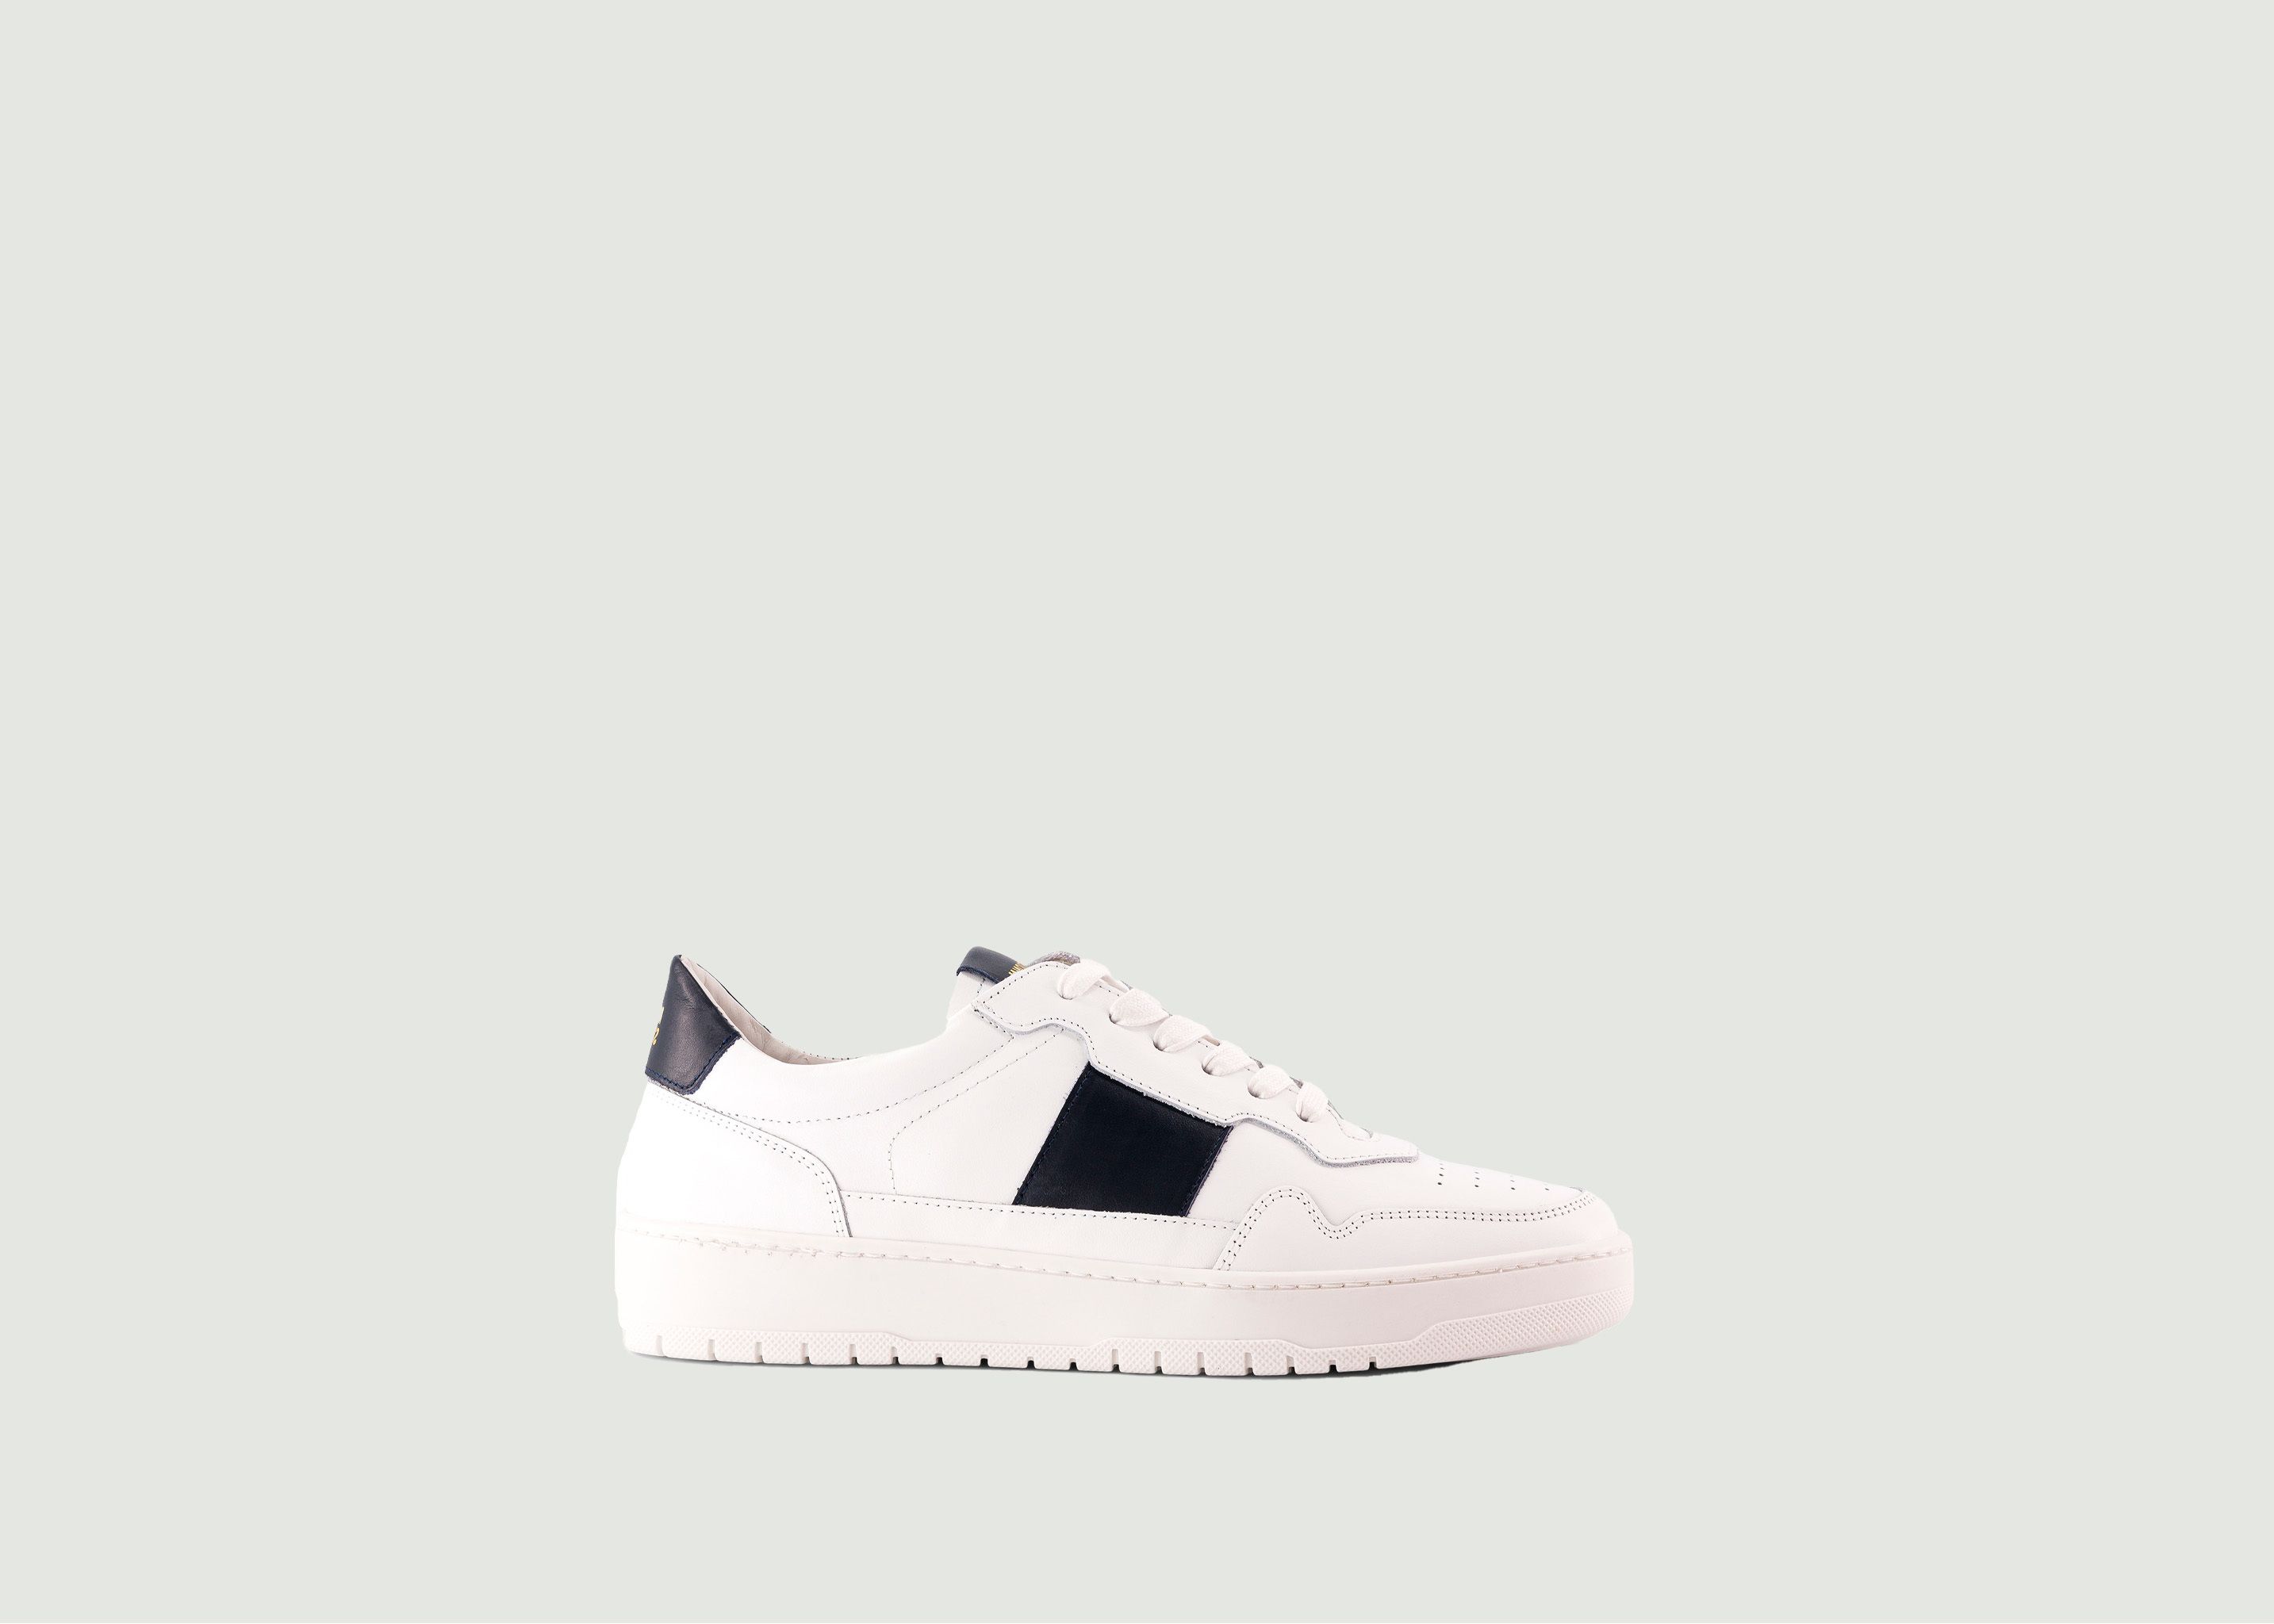 Low Sneakers in leather - National Standard